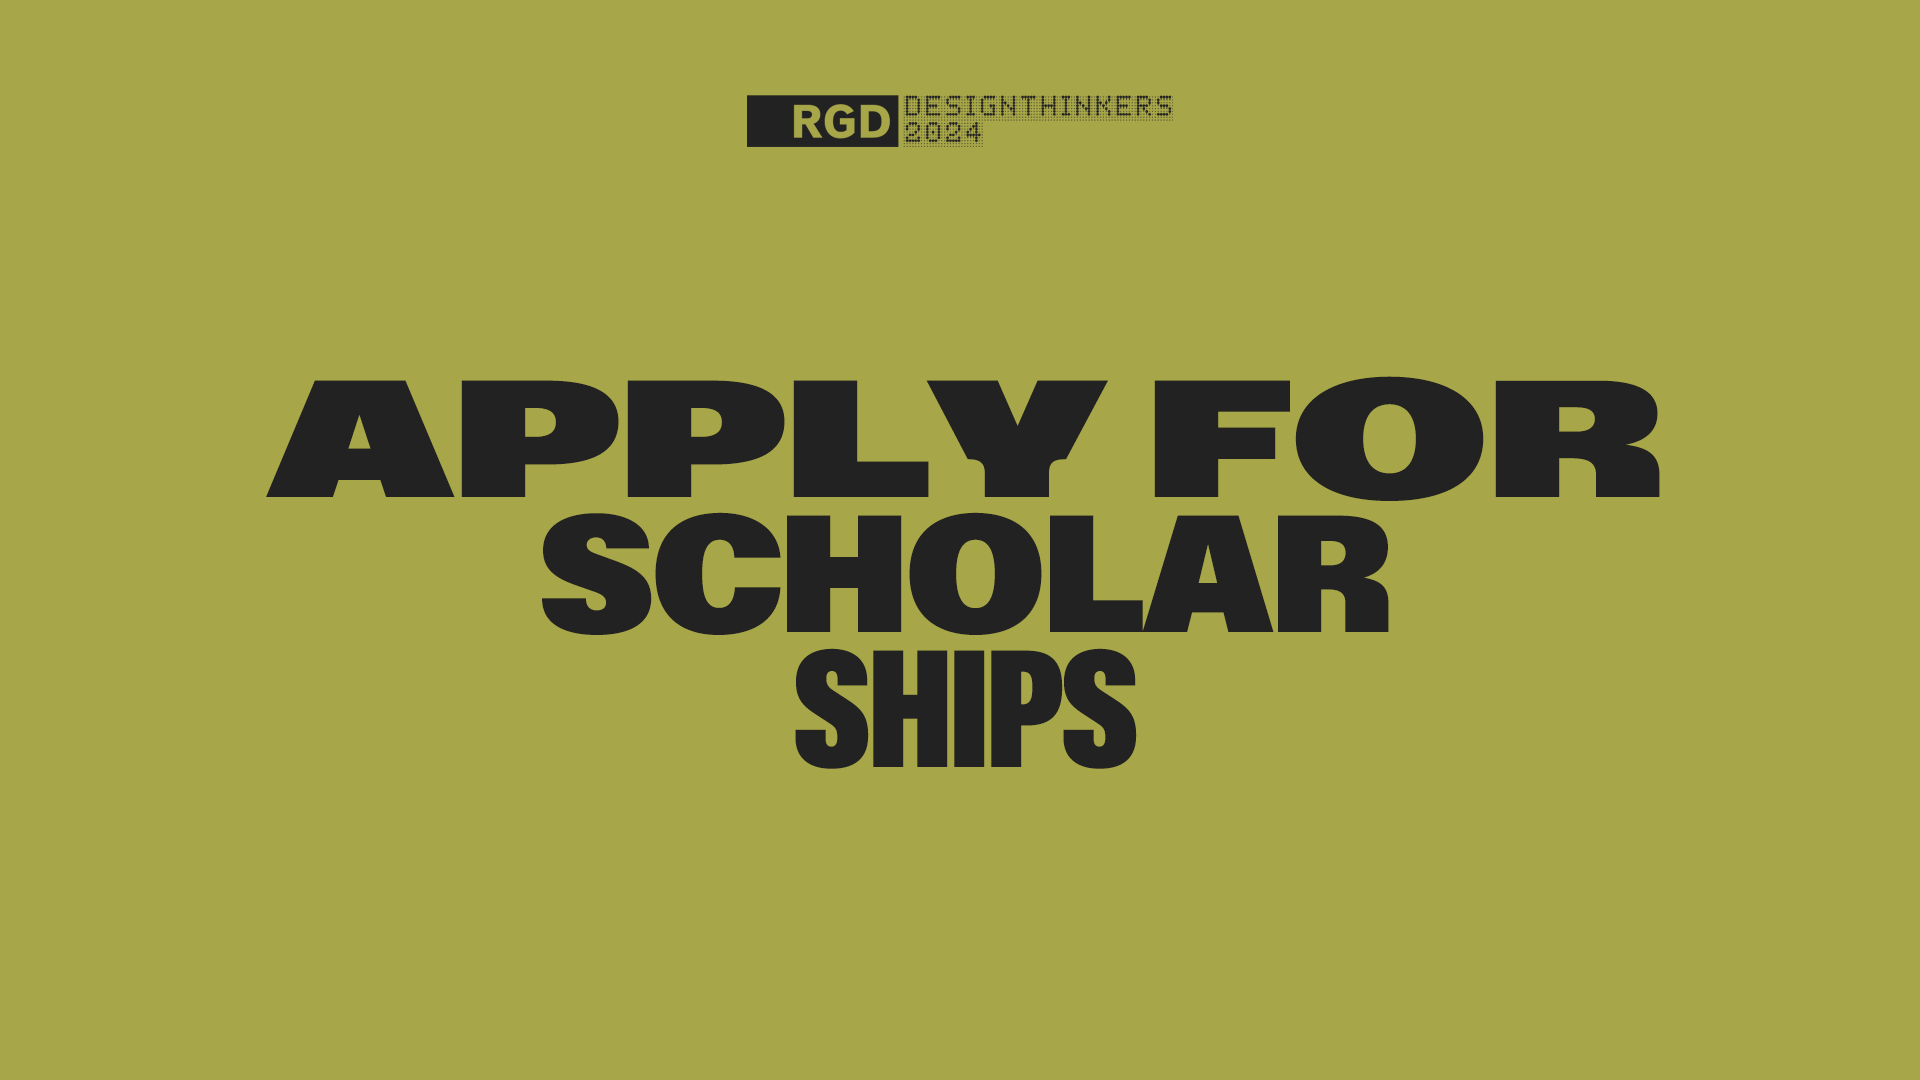 10 $500 scholarships available for DesignThinkers Vancouver